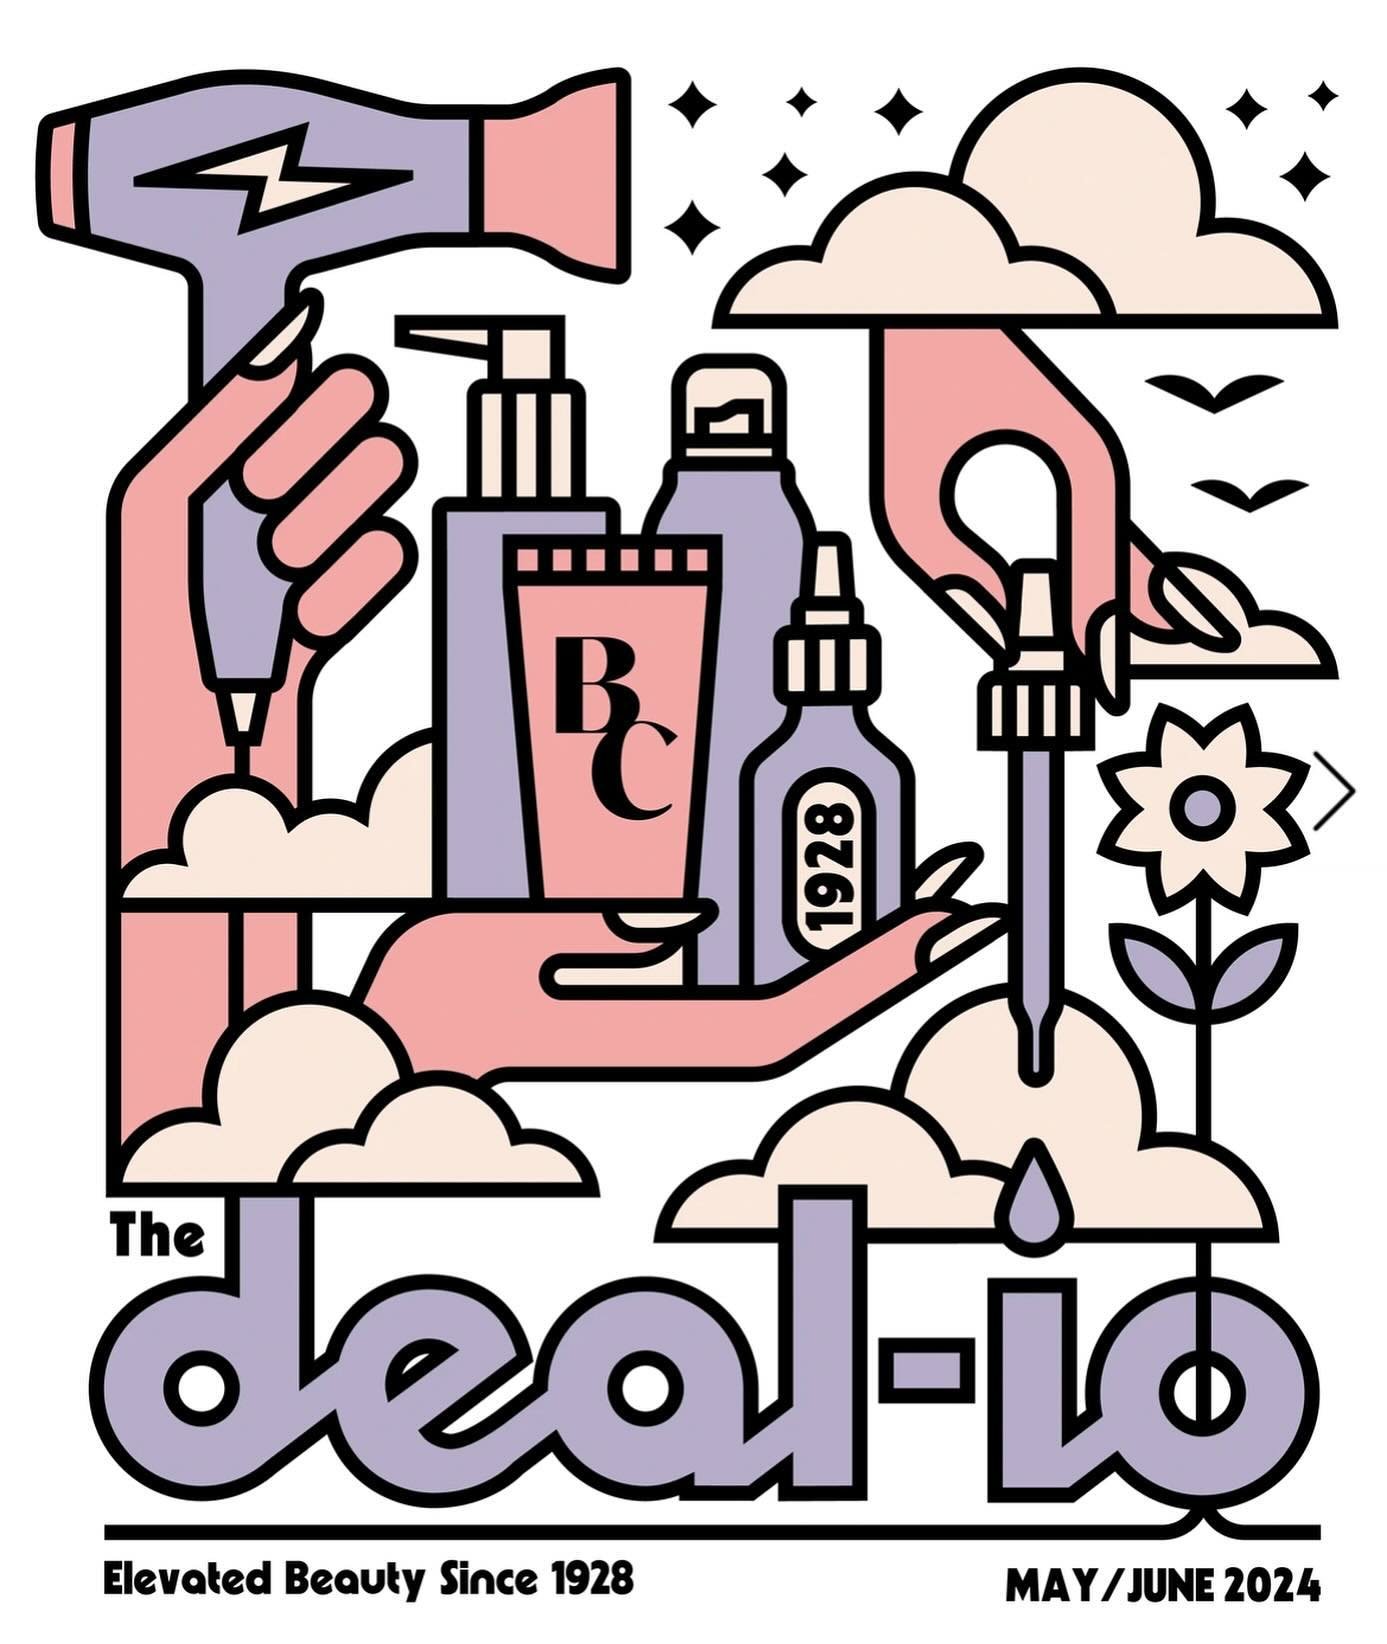 🎤 Our bi-monthly&rsquo;s got a whole new vibe! 💃 

Introducing&hellip;. 🥁 THE DEAL-IO!! 

Your guide to slaying your salon biz 💖 To receive your copy, text DEALIO to 888-681-9775 or connect with your Beauty Craft salon representative 🤩

#beauty 